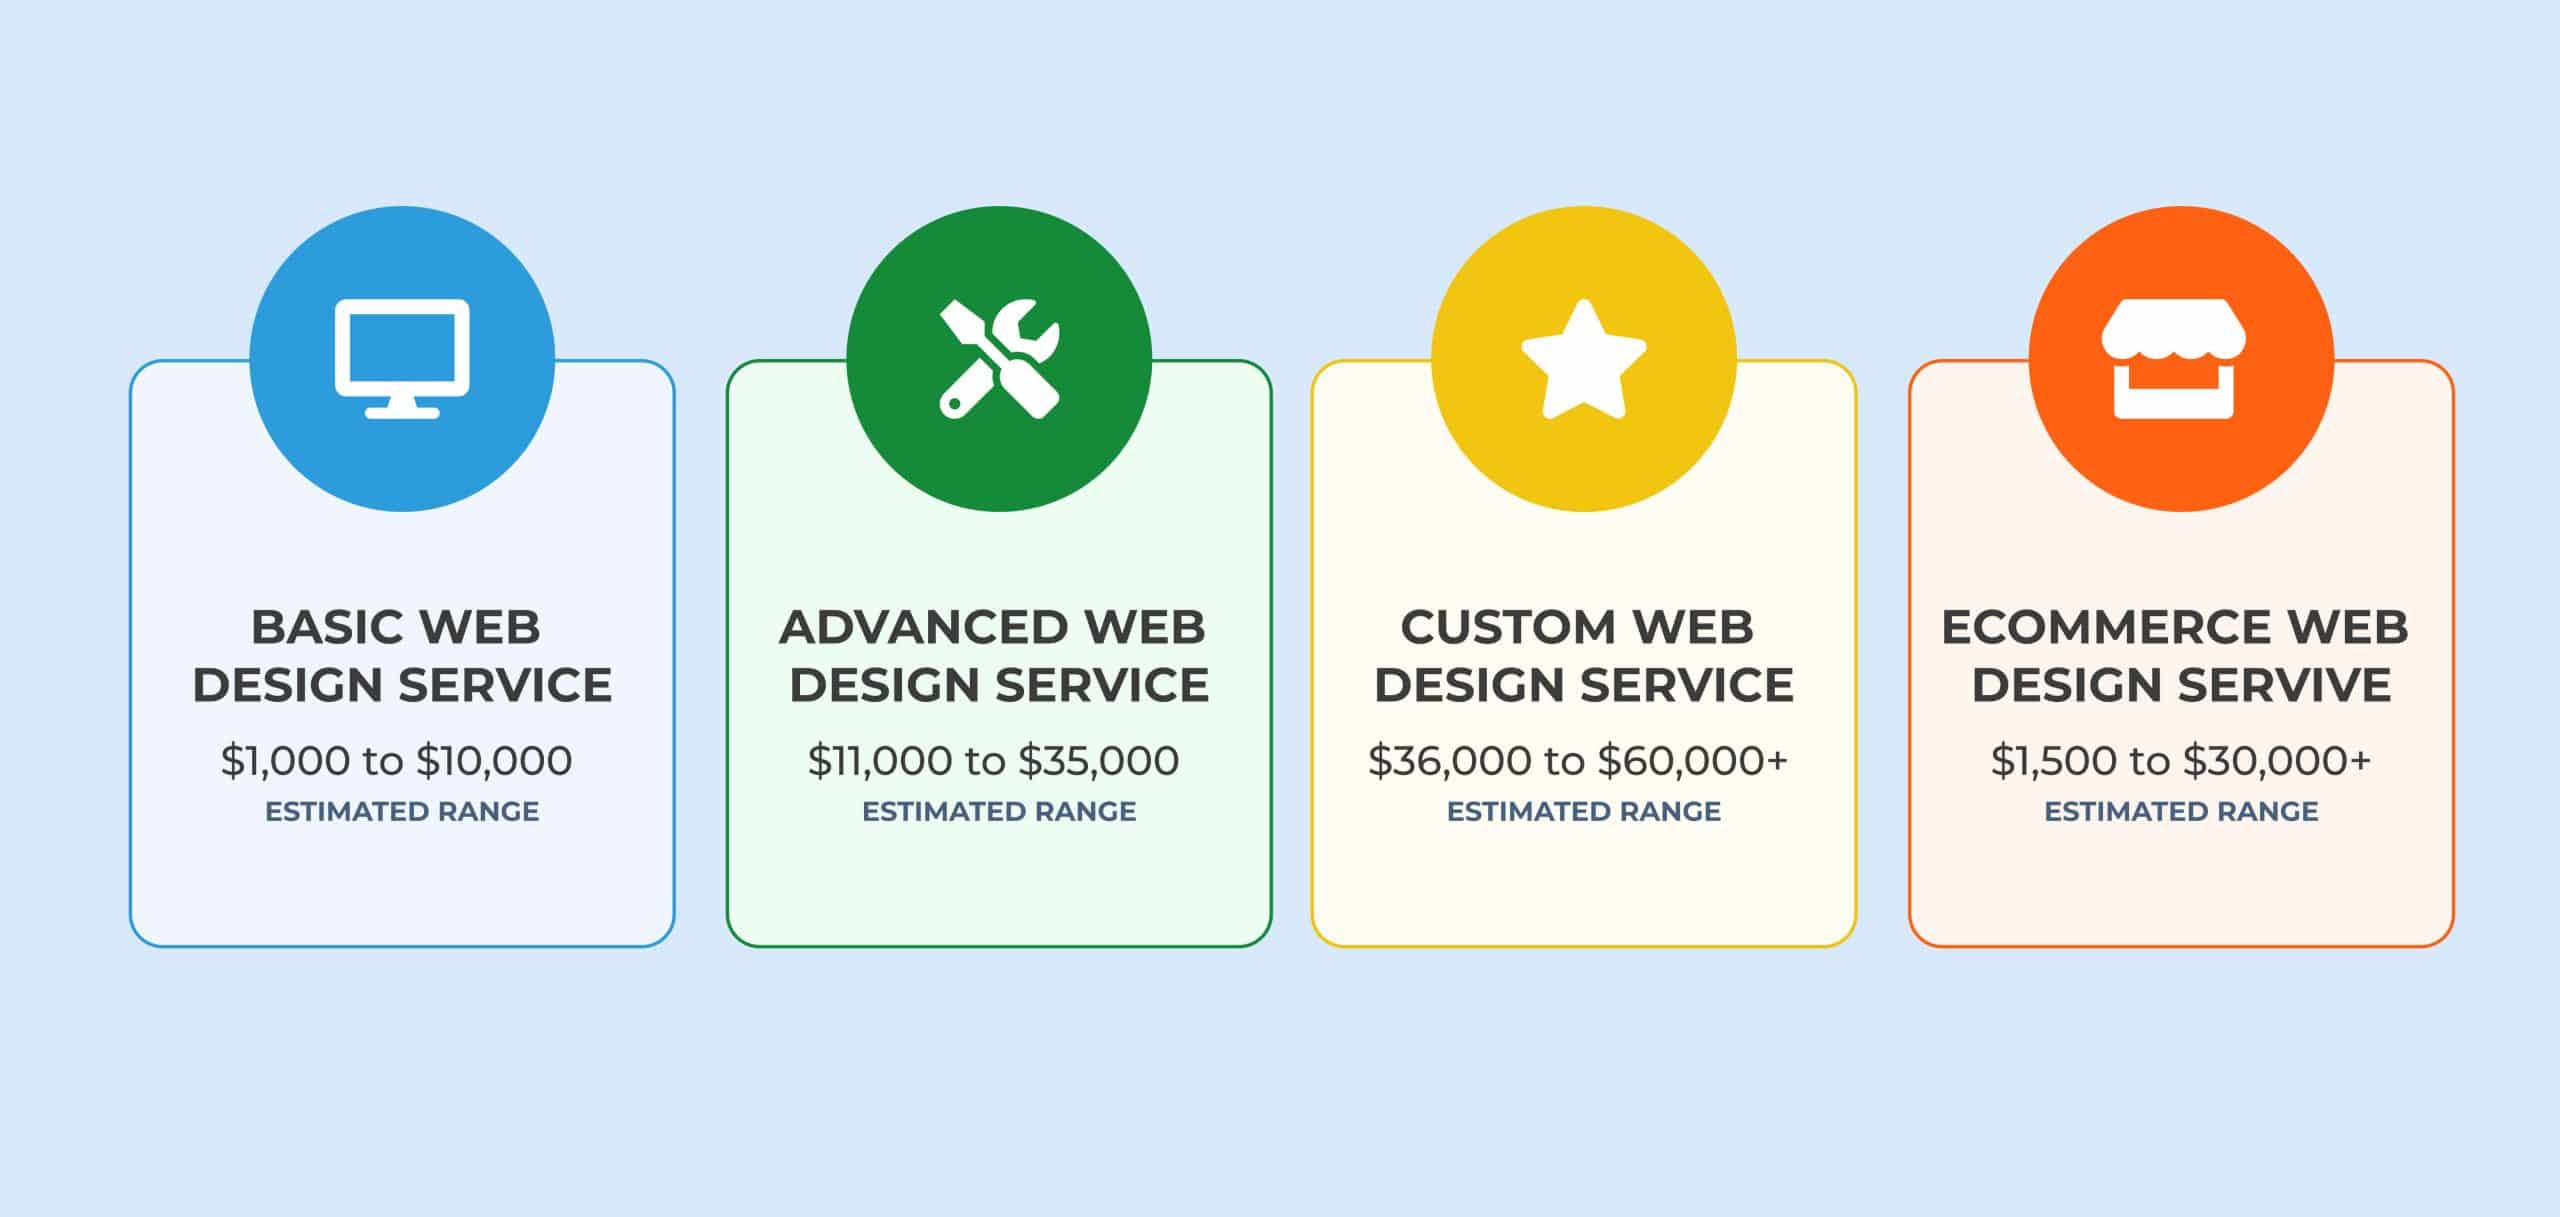 What is the basic price for a web design?